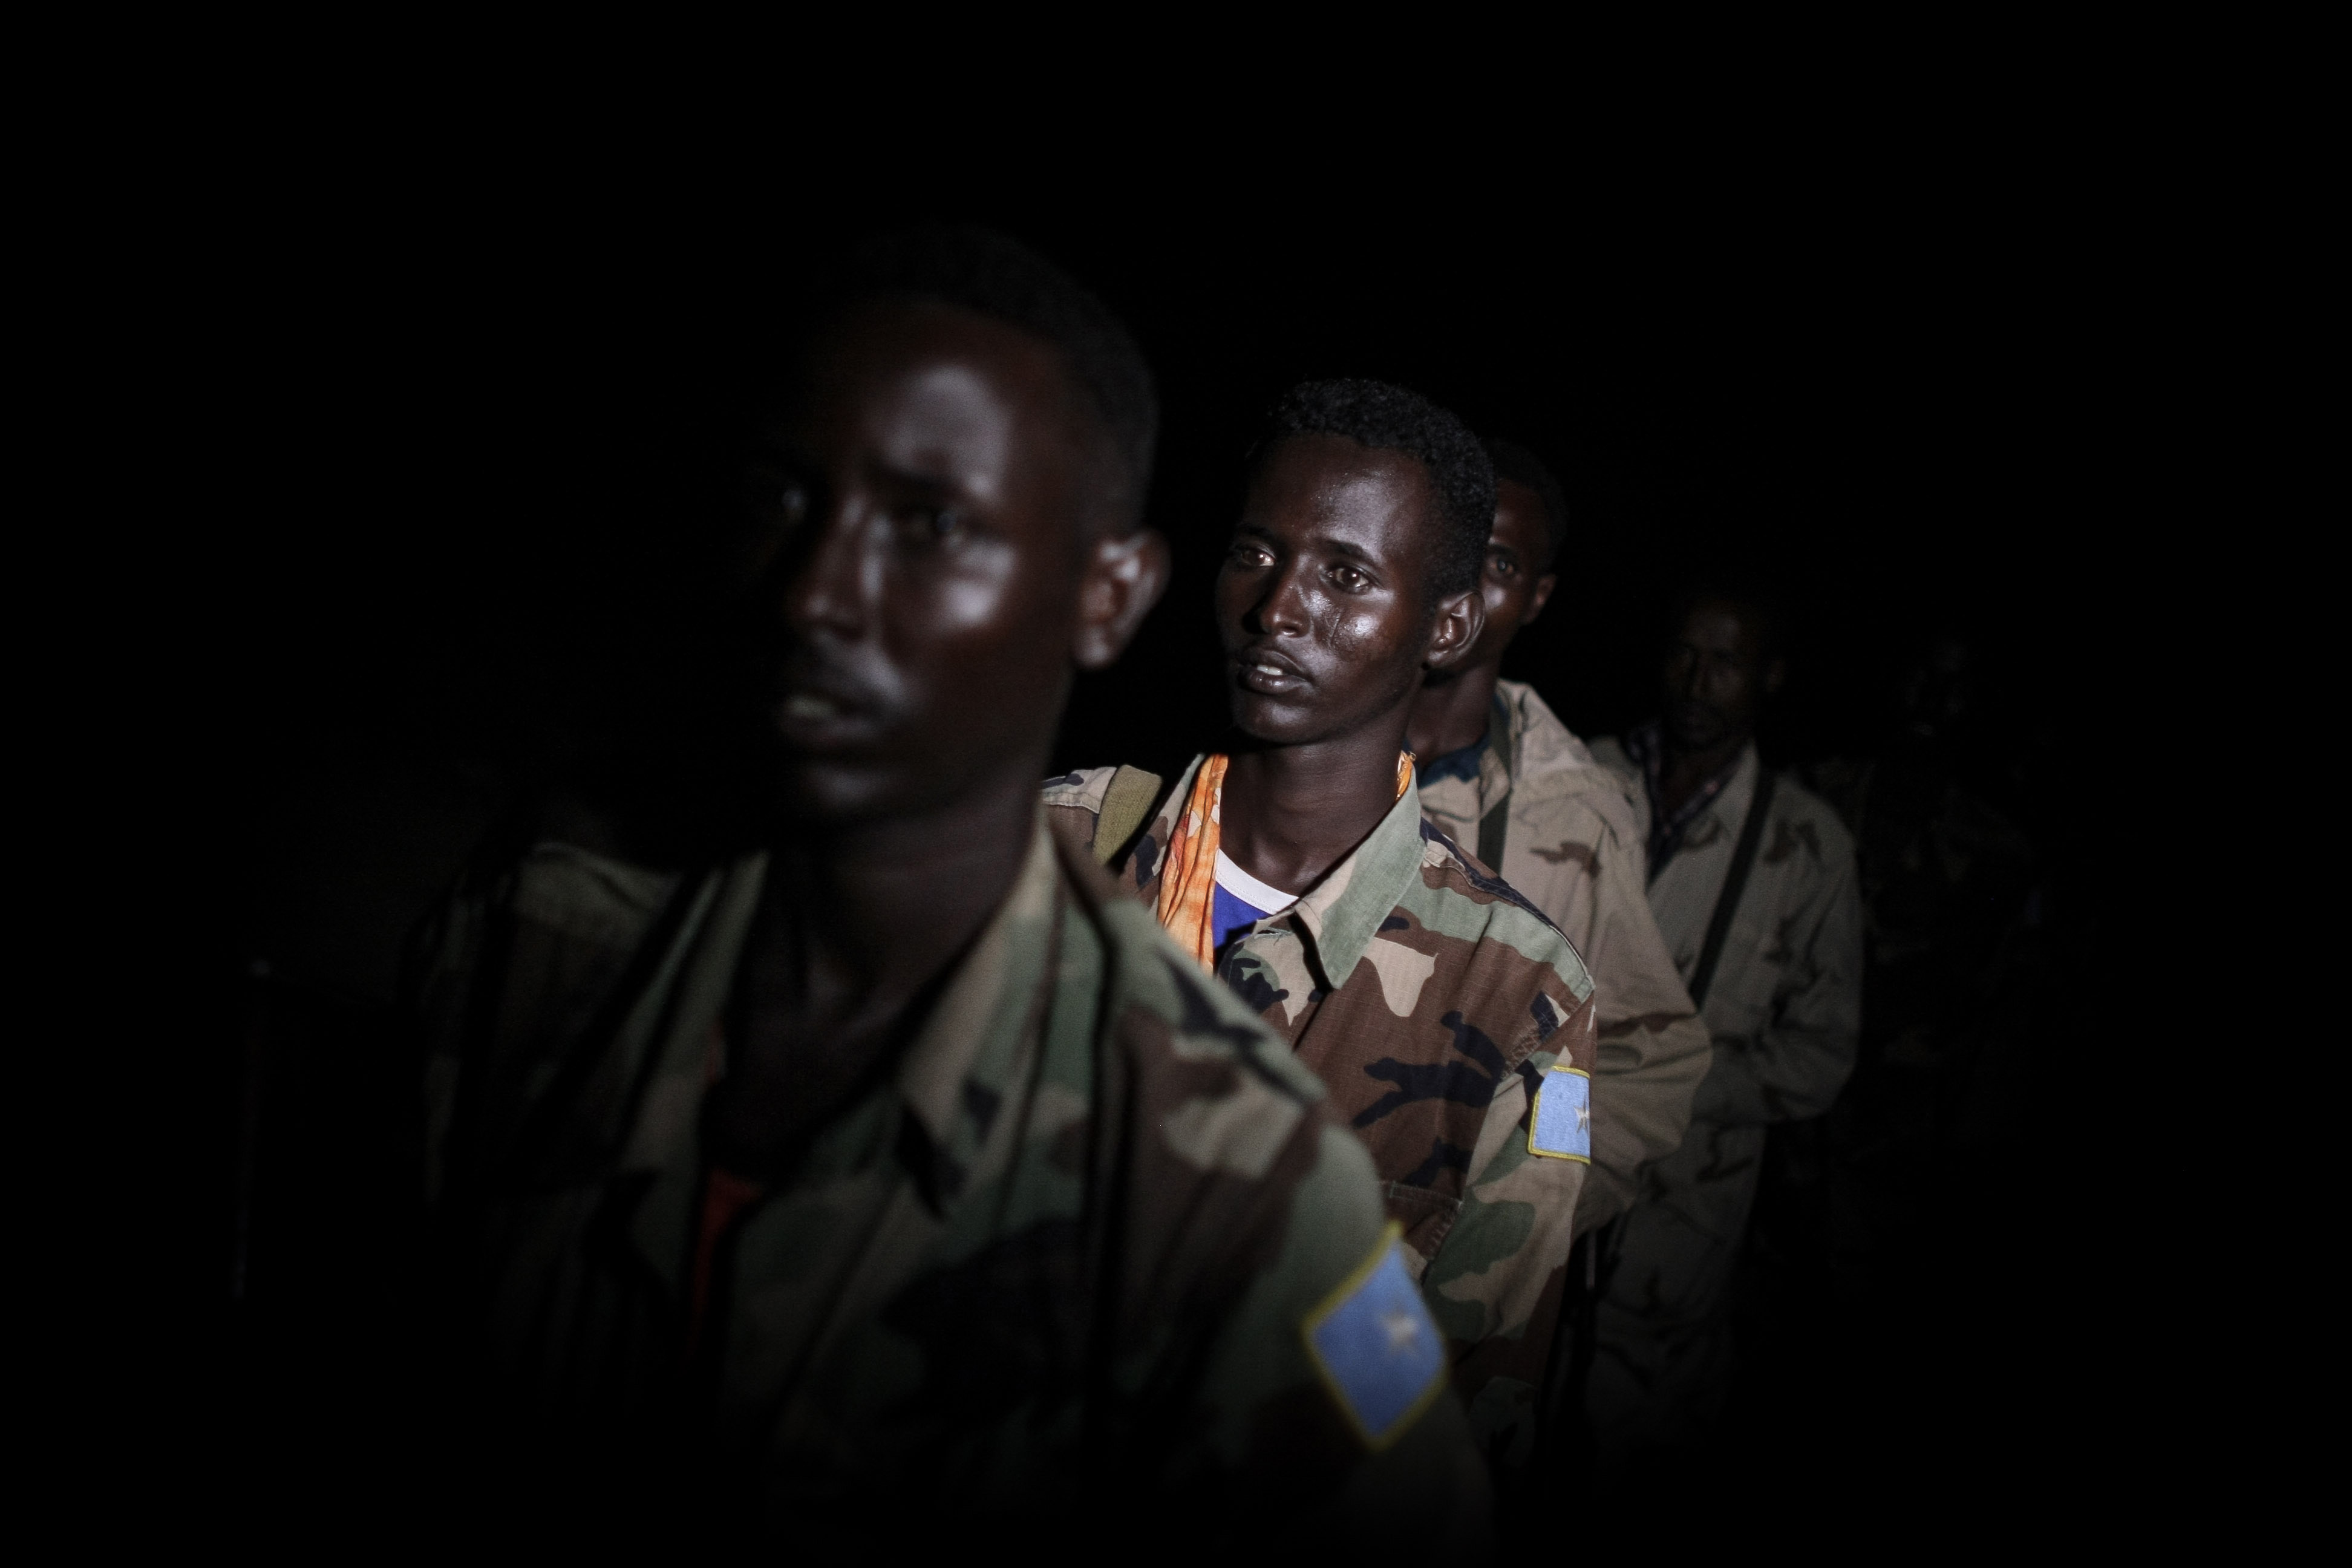 On night operations with the african union mission in somalia 09 photo